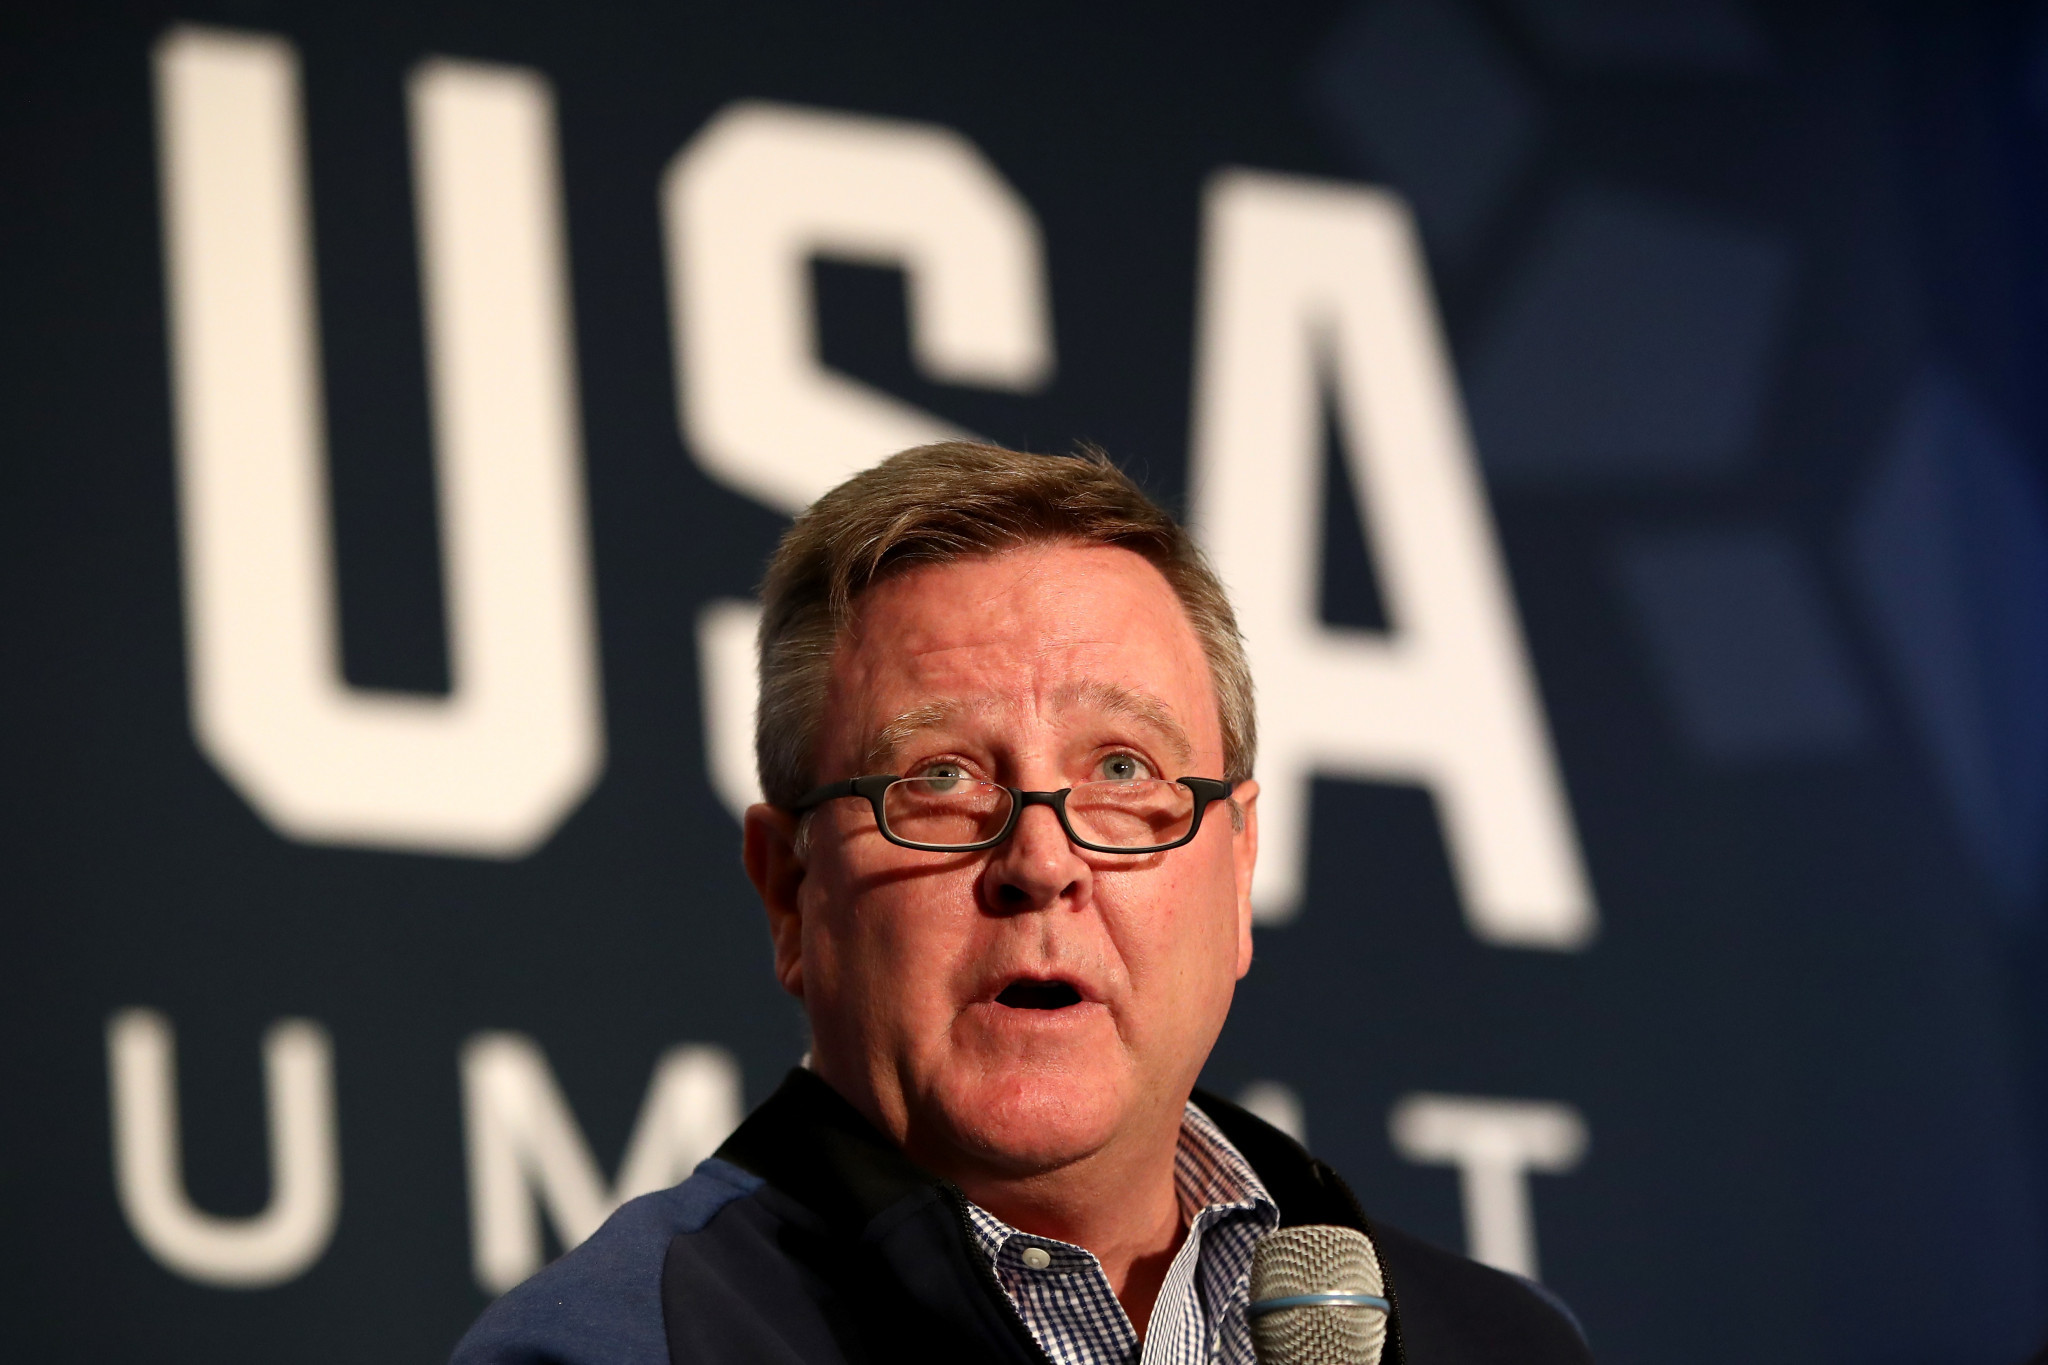 USOC chief executive Blackmun diagnosed with prostate cancer